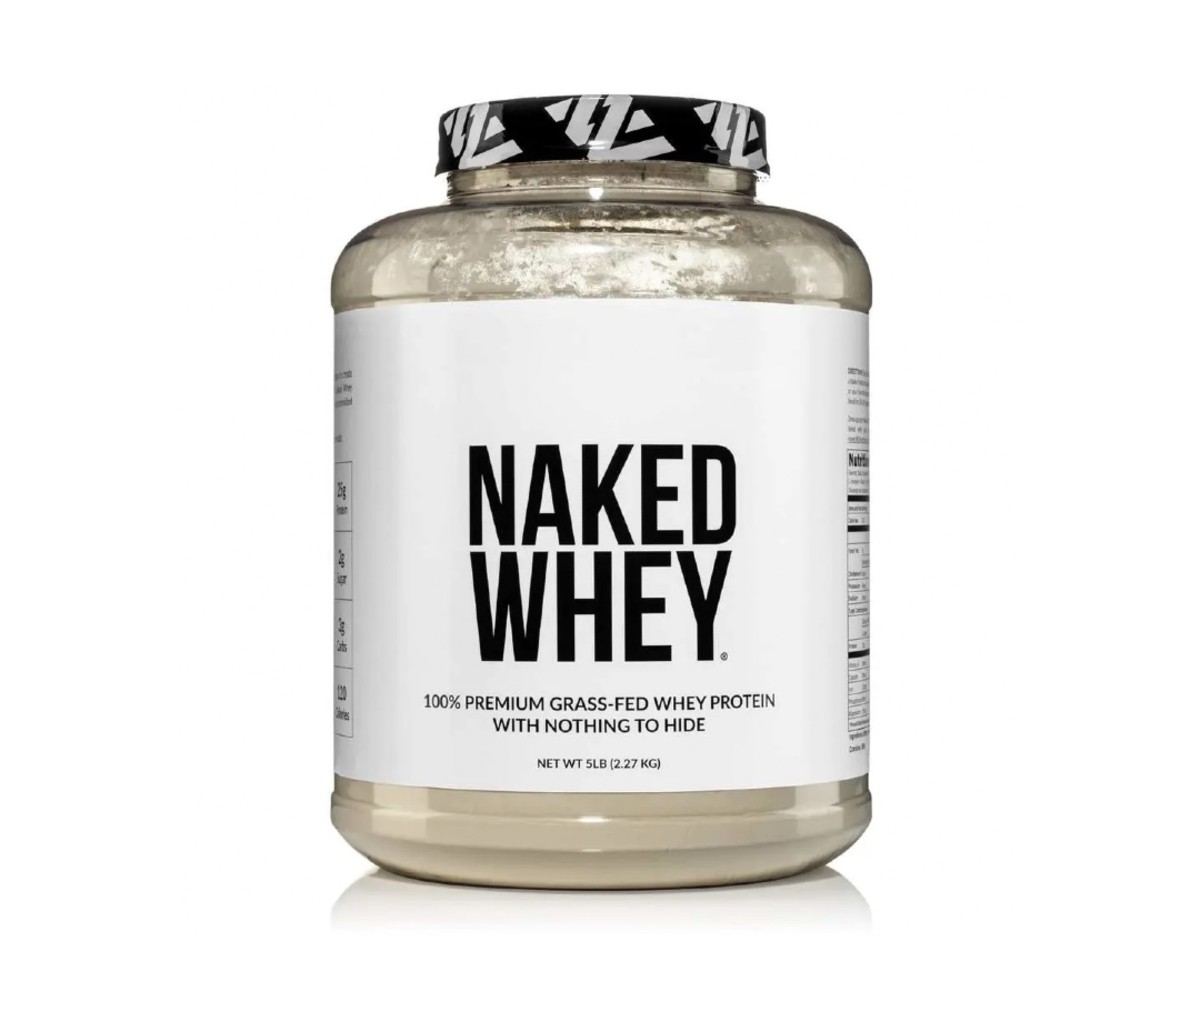  Naked’s whey is one of the best clean protein powder and also sourced from grass-fed cows from small California dairy farms raised without growth hormones.